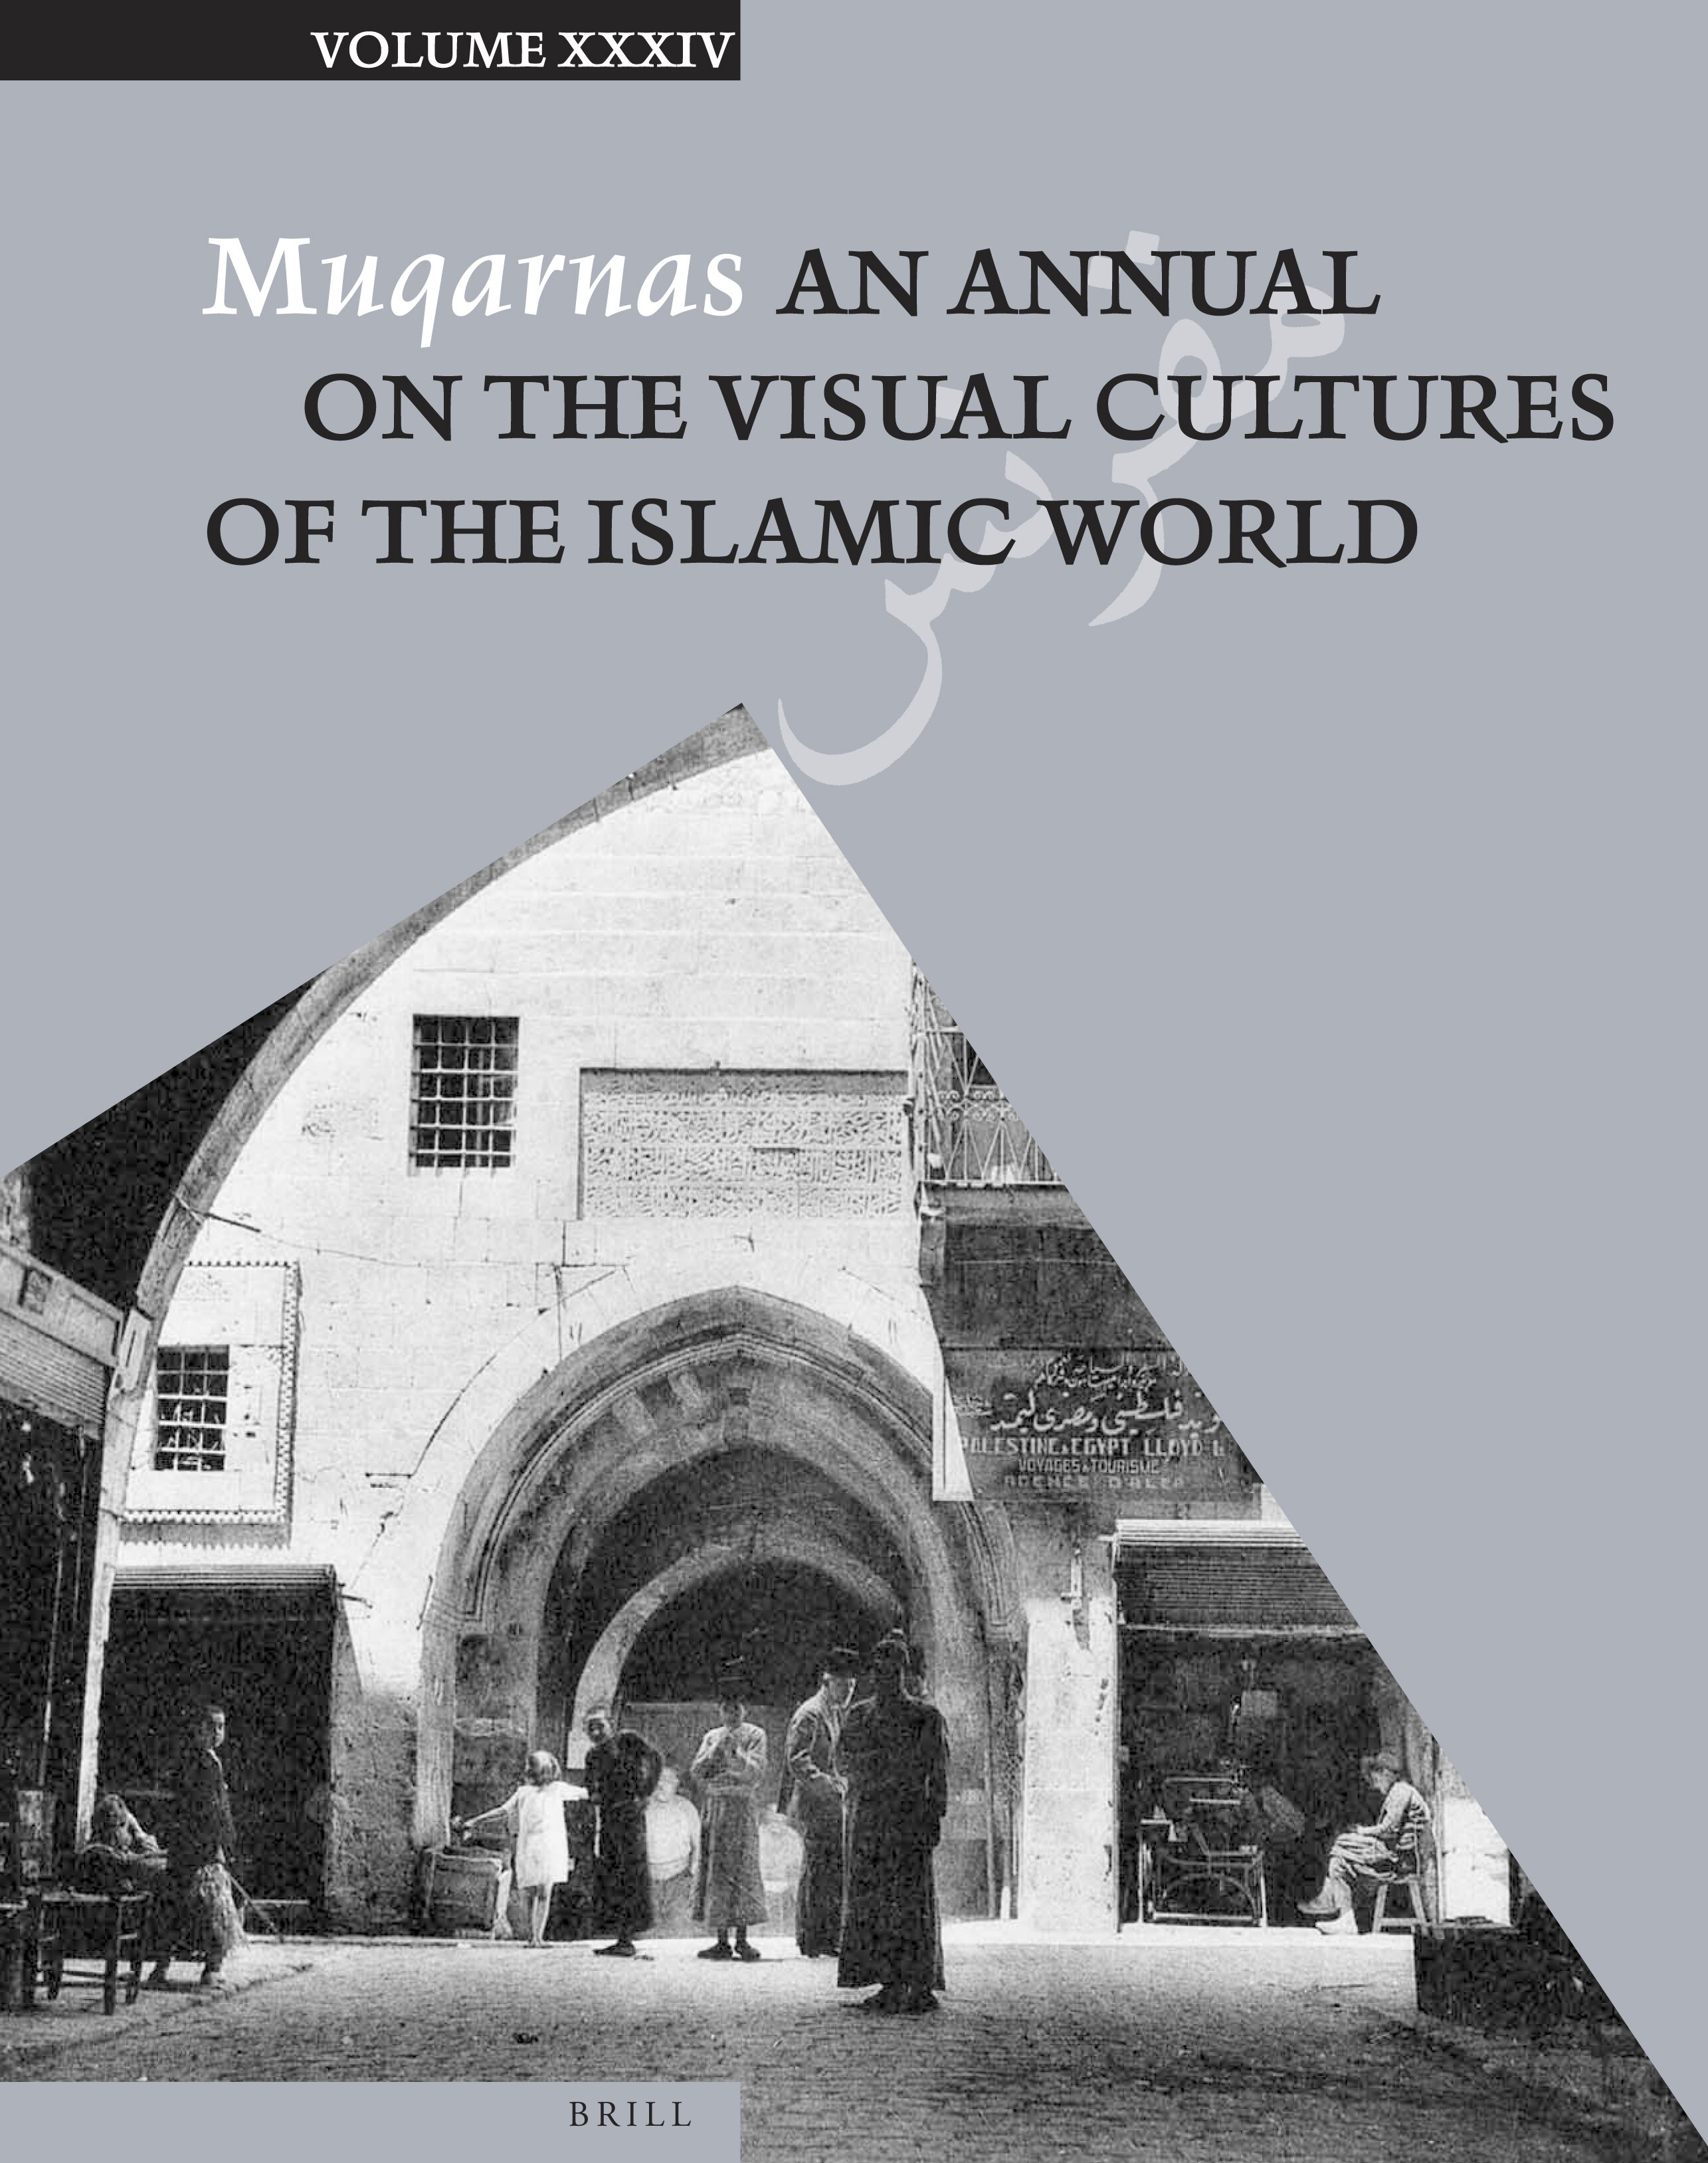 Muqarnas XXXIV: An Annual on the Visual Cultures of the Islamic World